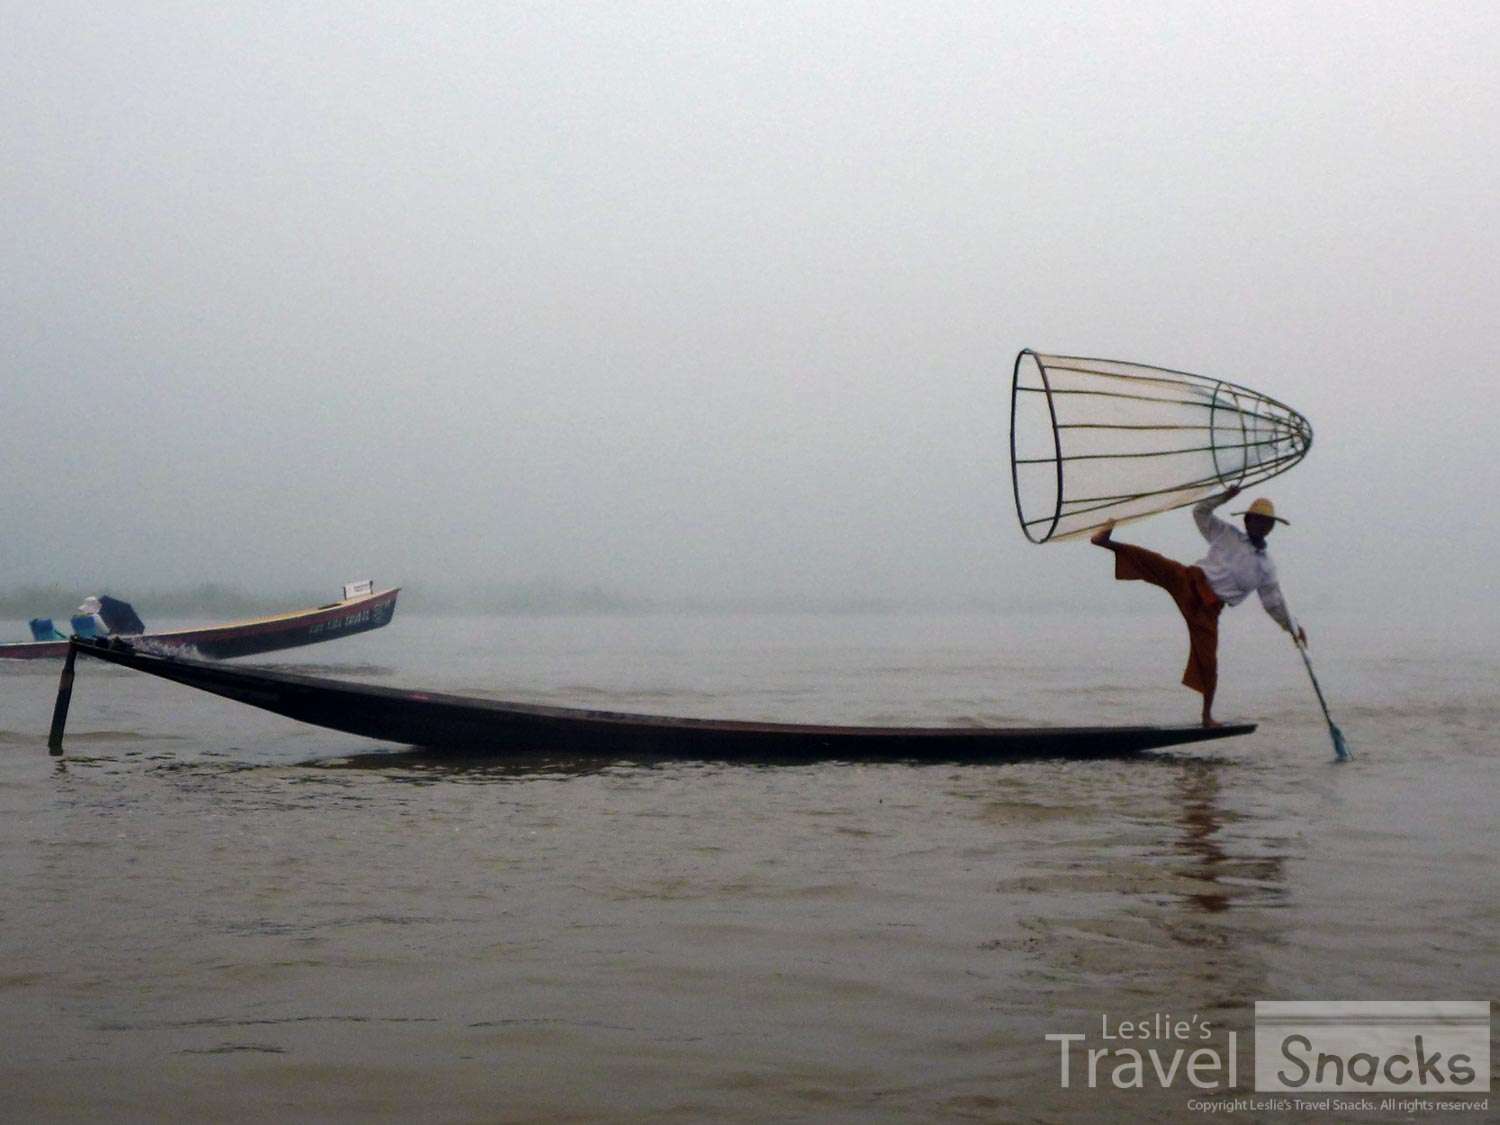 Here's my photo from Inle Lake and i can tell you, this is only a pose for the tourists.